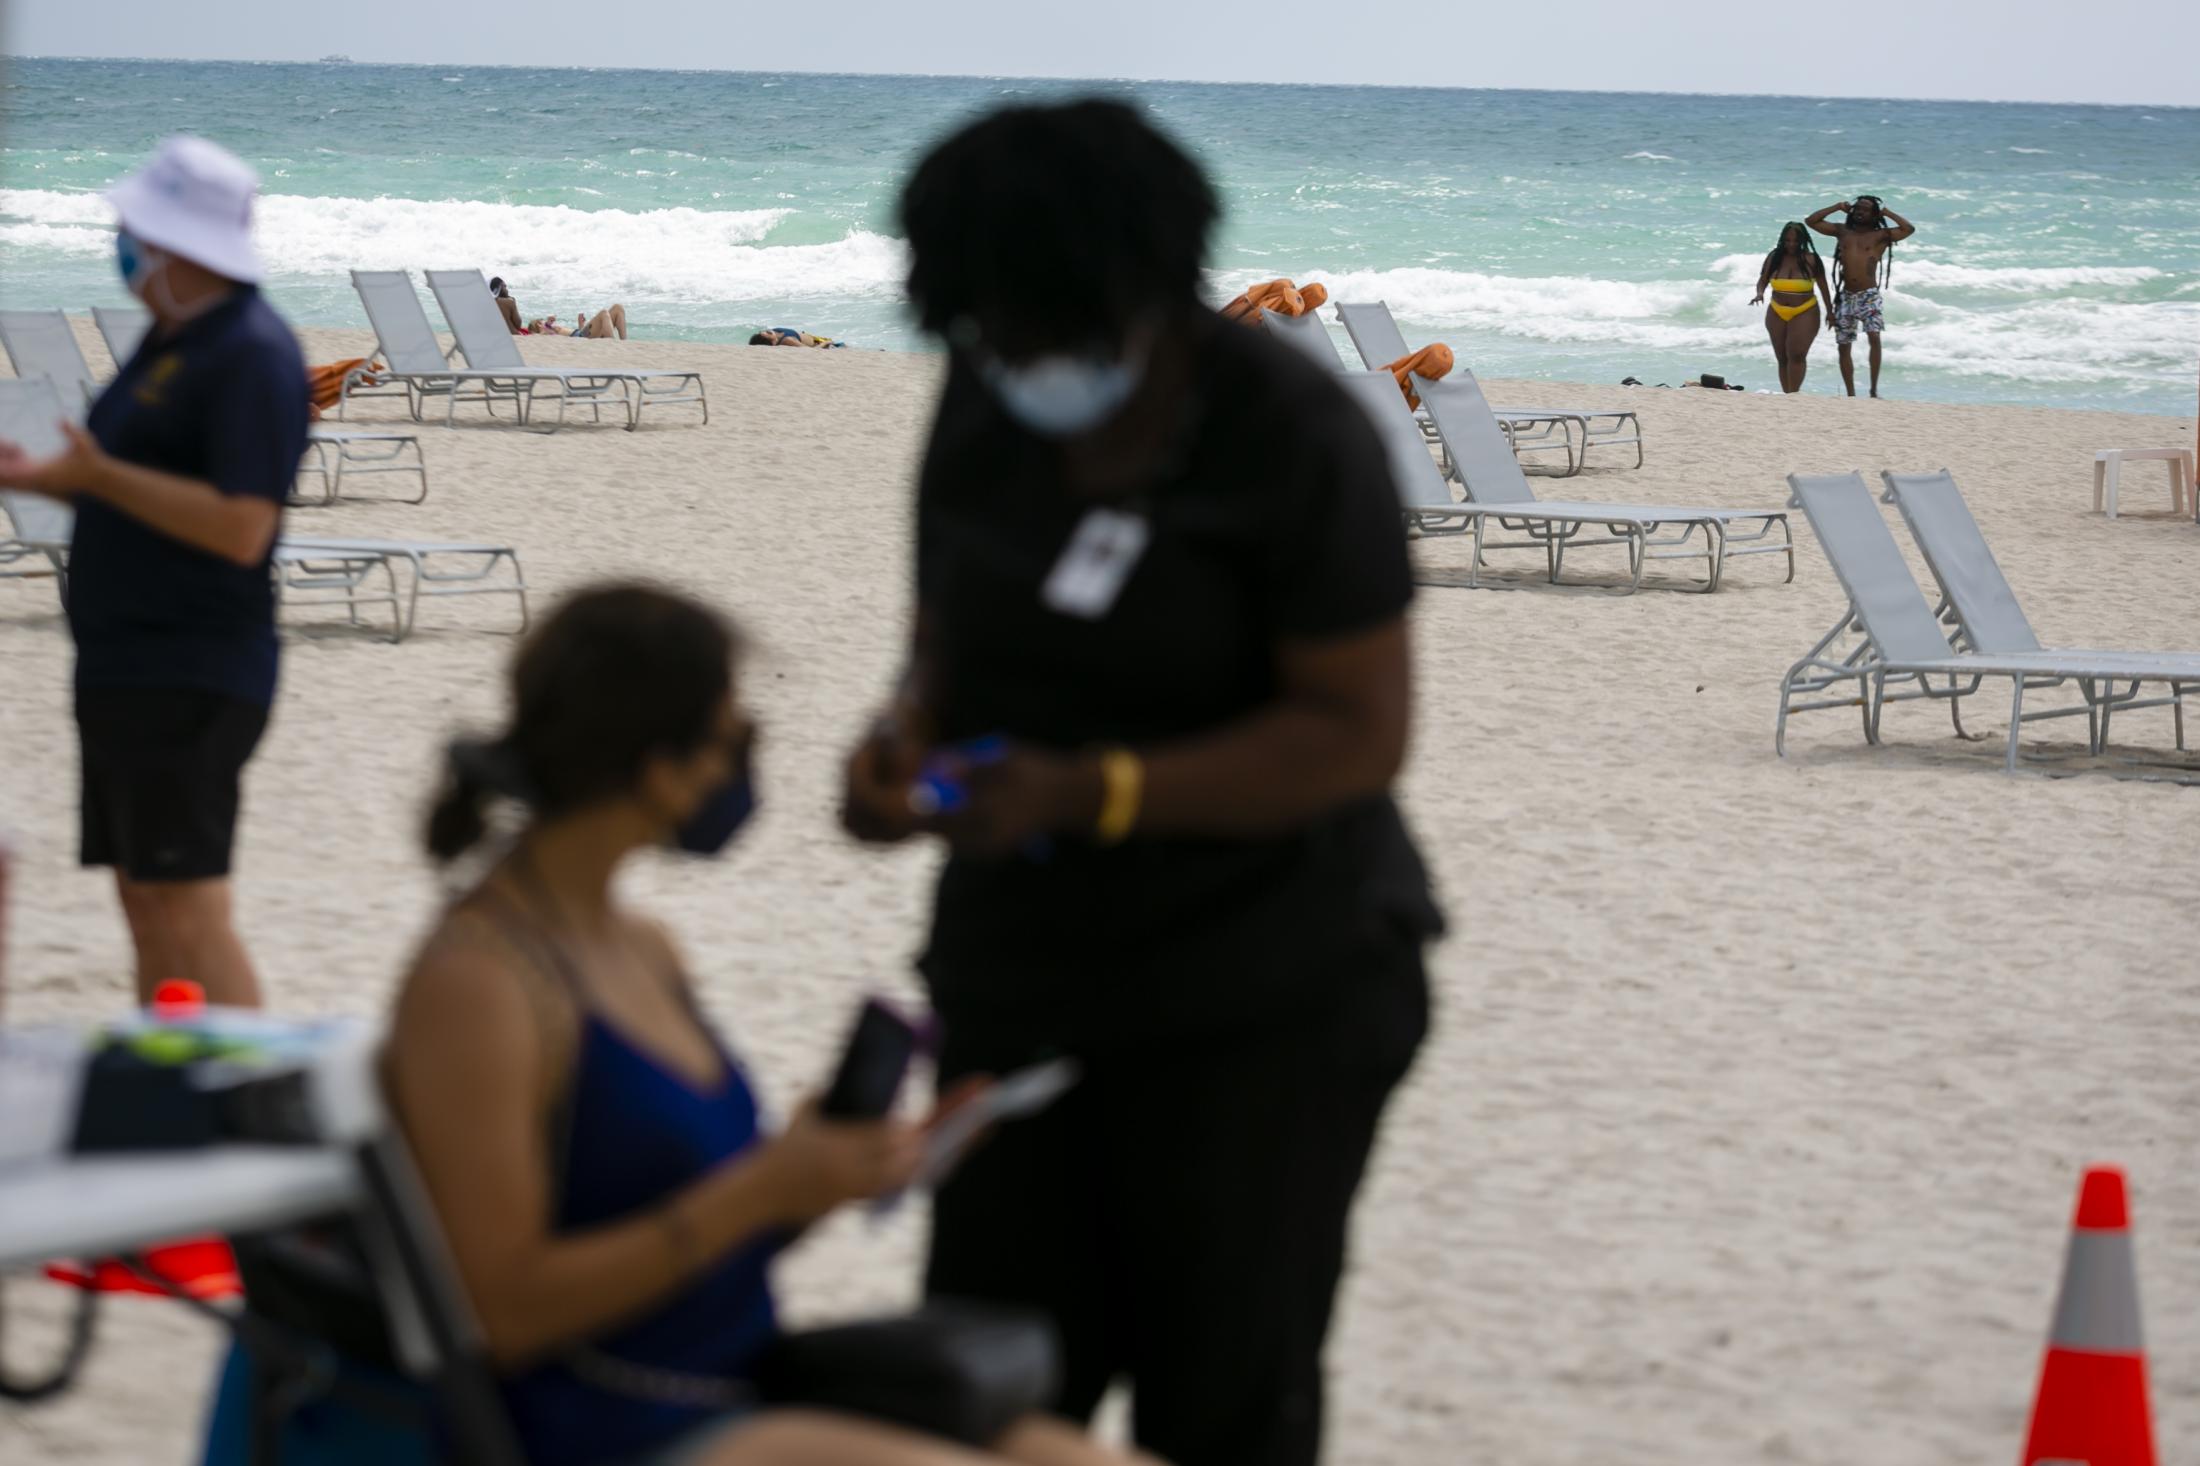 2021 - Tourists get Johnson & Johnson COVID-19 vaccine at Miami Beach - Beachgoers are seen in front of a pop-up vaccination...